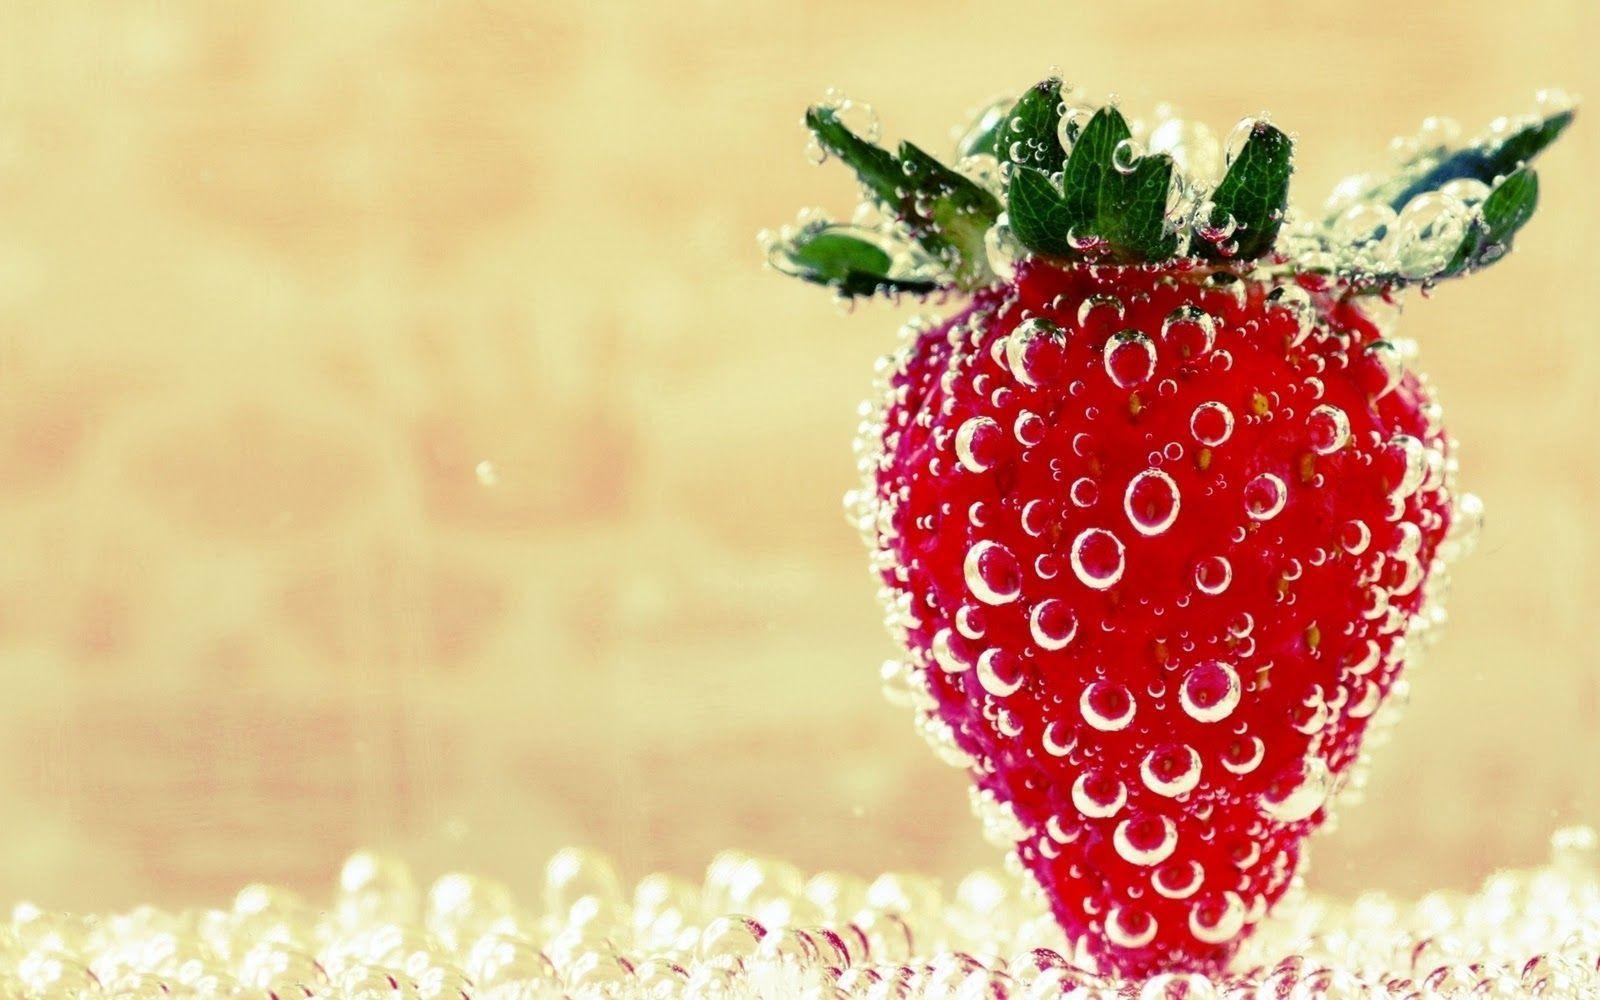 amazing HD wallpaper and photo about strawberry. Design